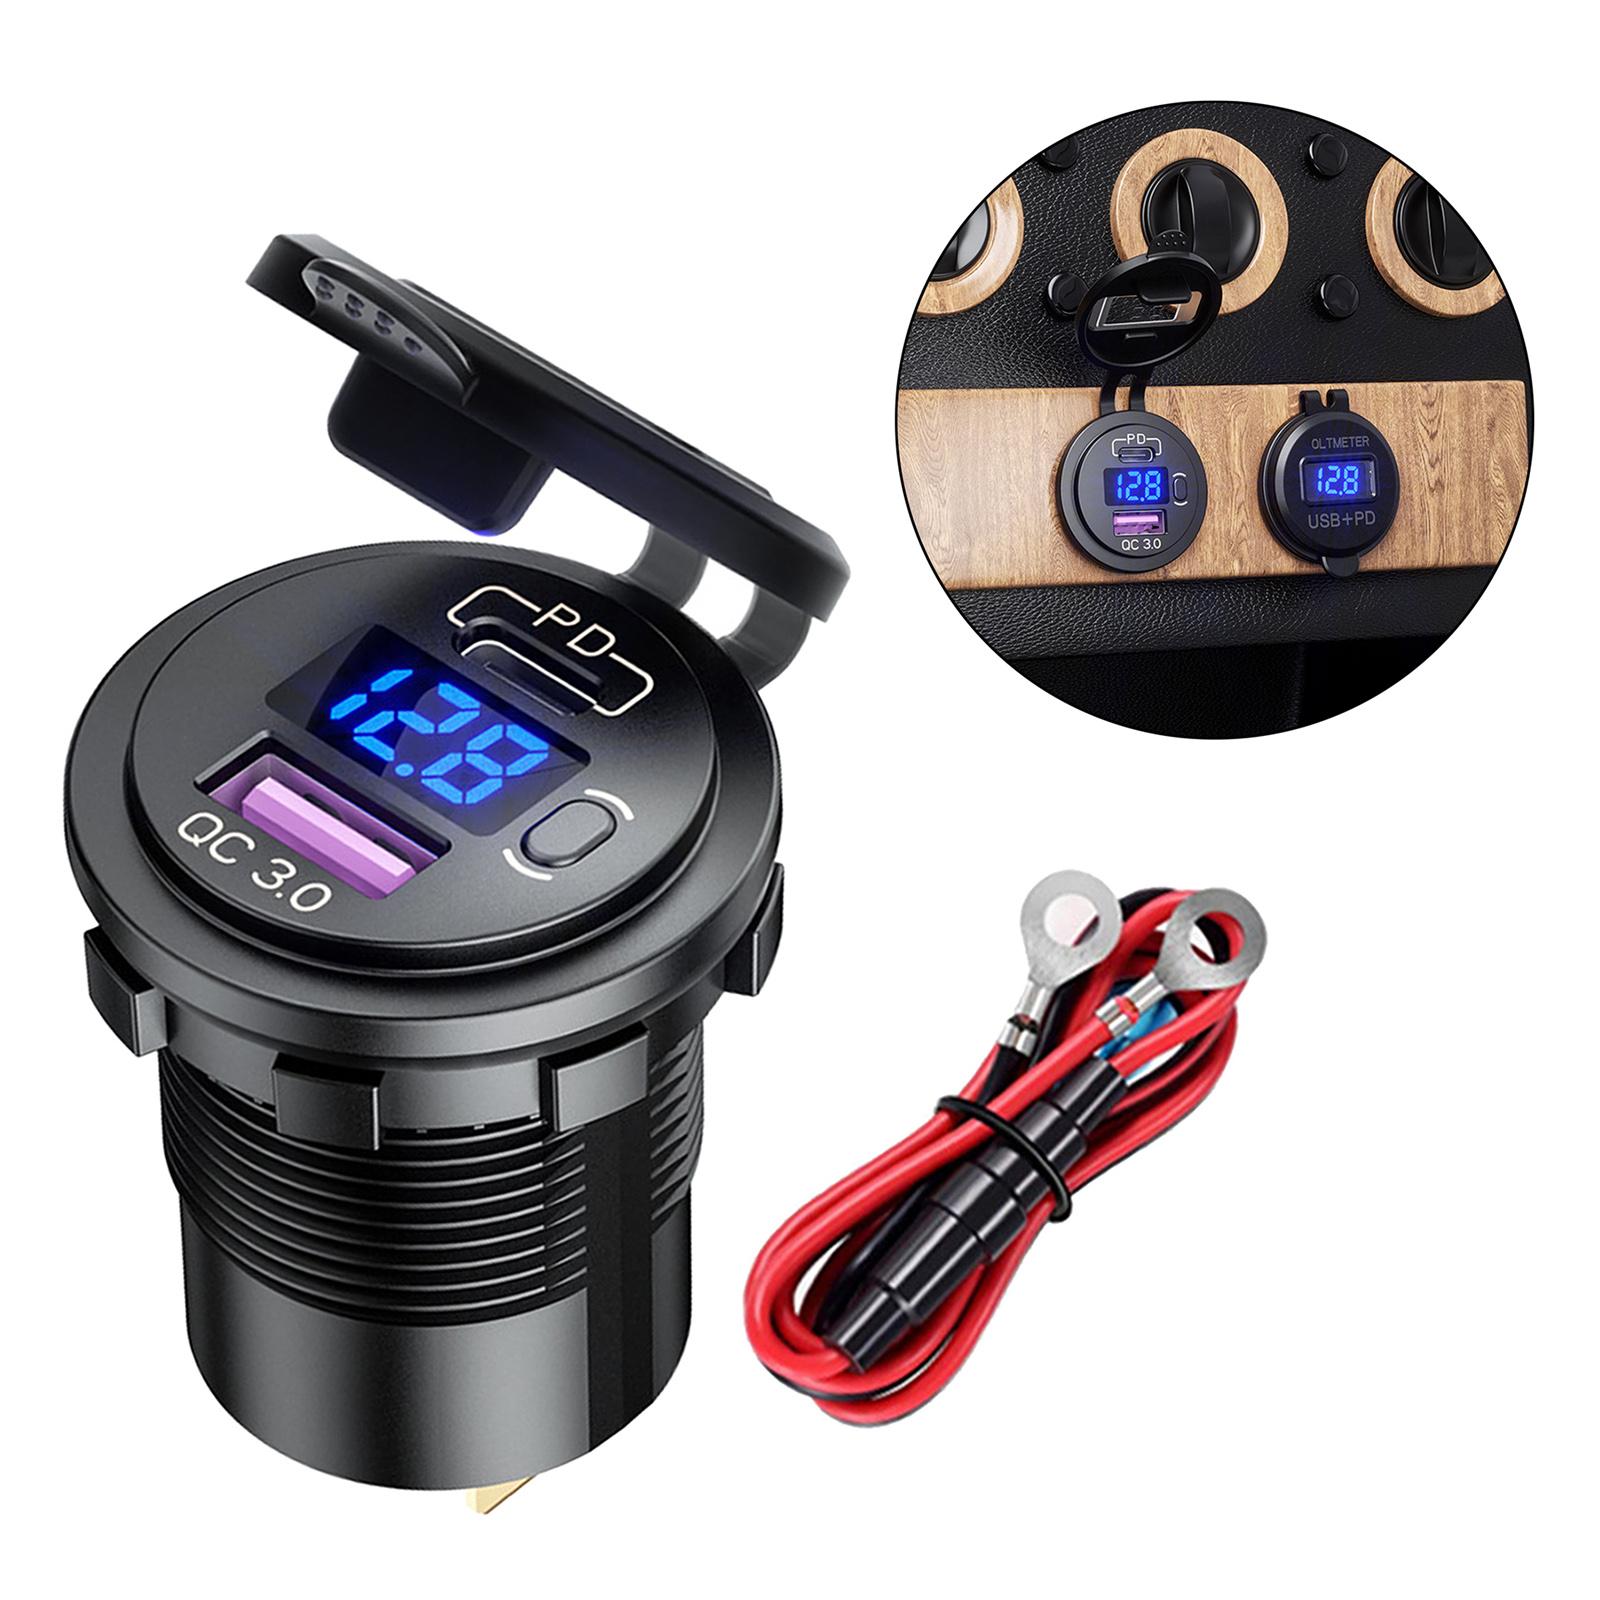 Dual USB Car Charger Quick Charge PD&QC 3.0 Voltage Measure